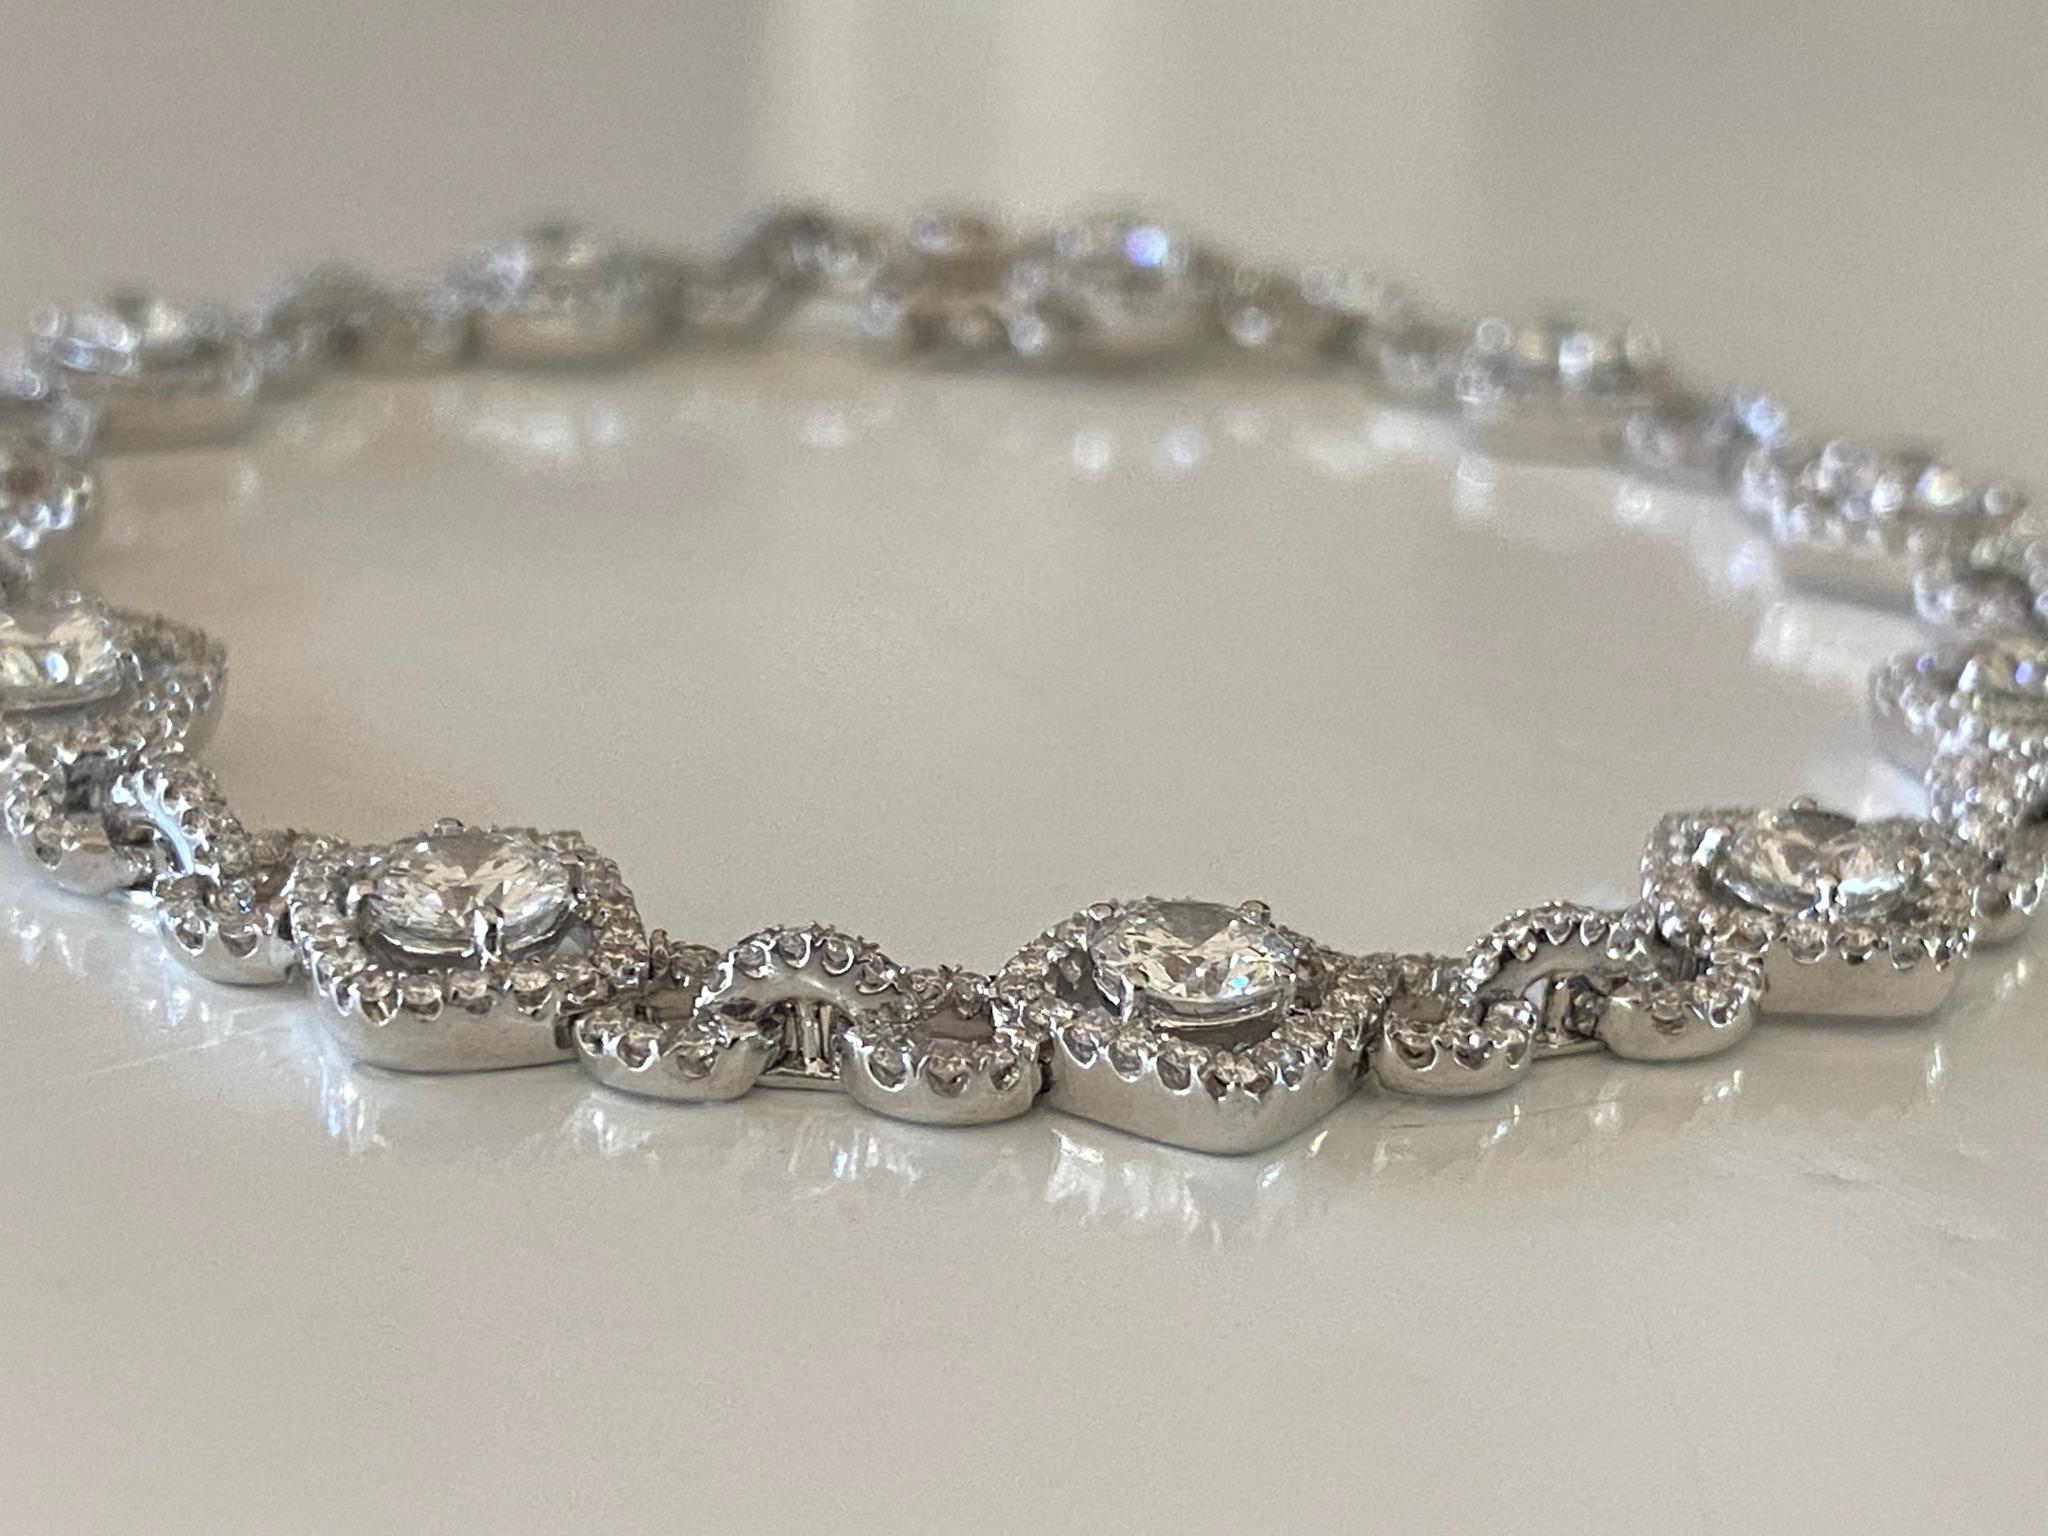 This dazzling diamond bracelet features eleven round brilliant-cut diamond center stones each measuring 0.27 carats, F color, SI1 clarity, surrounded by a halo of round diamonds connected by circular diamond links and fashioned from 18kt white gold.